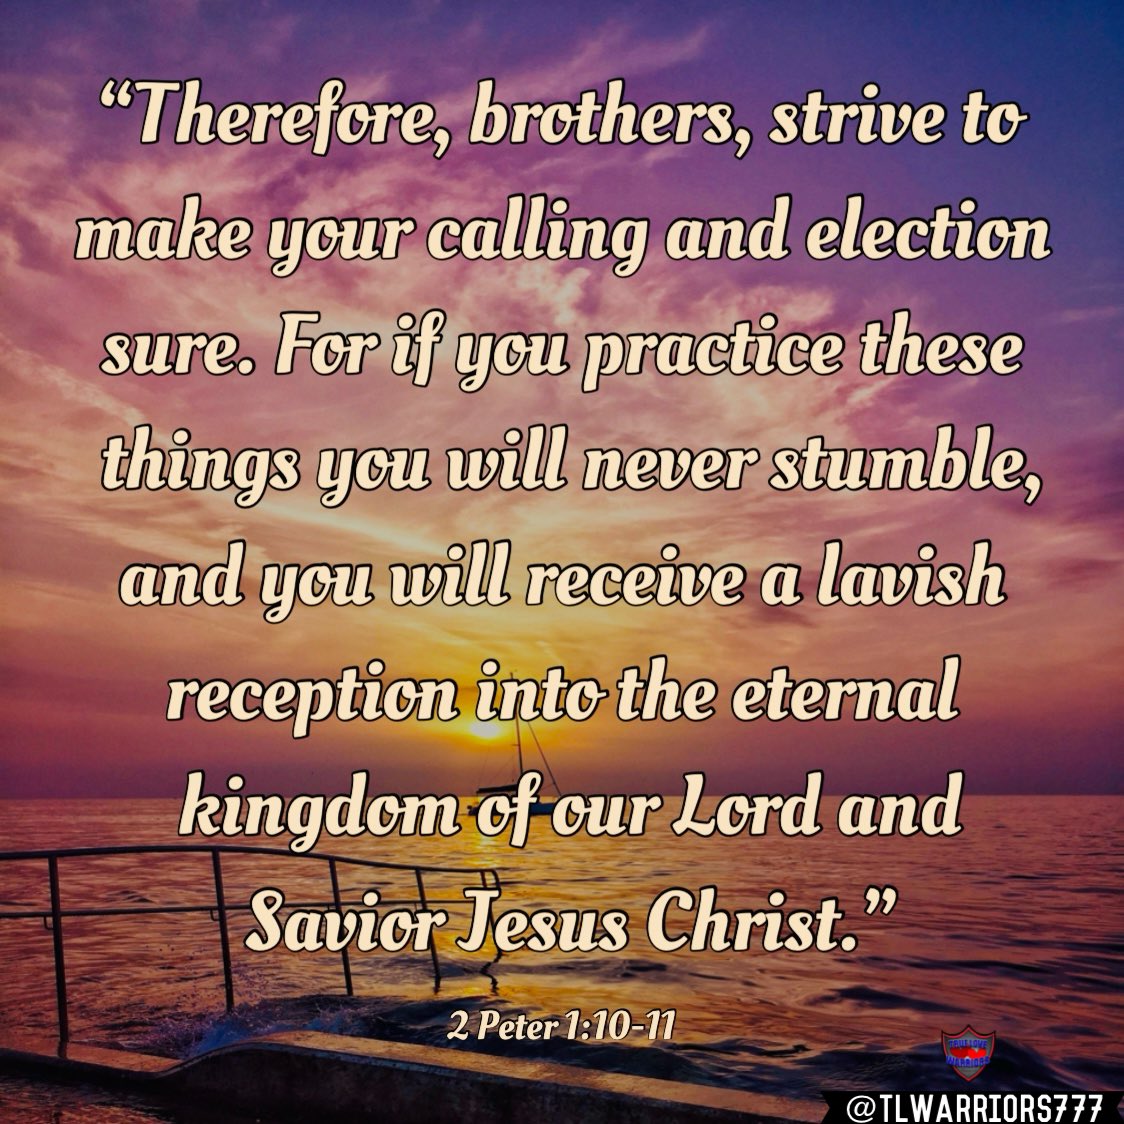 “Therefore, brothers, strive to make your calling and election sure. For if you practice these things you will never stumble, and you will receive a lavish reception into the eternal kingdom of our Lord and Savior Jesus Christ.” 2 Peter 1:10-11